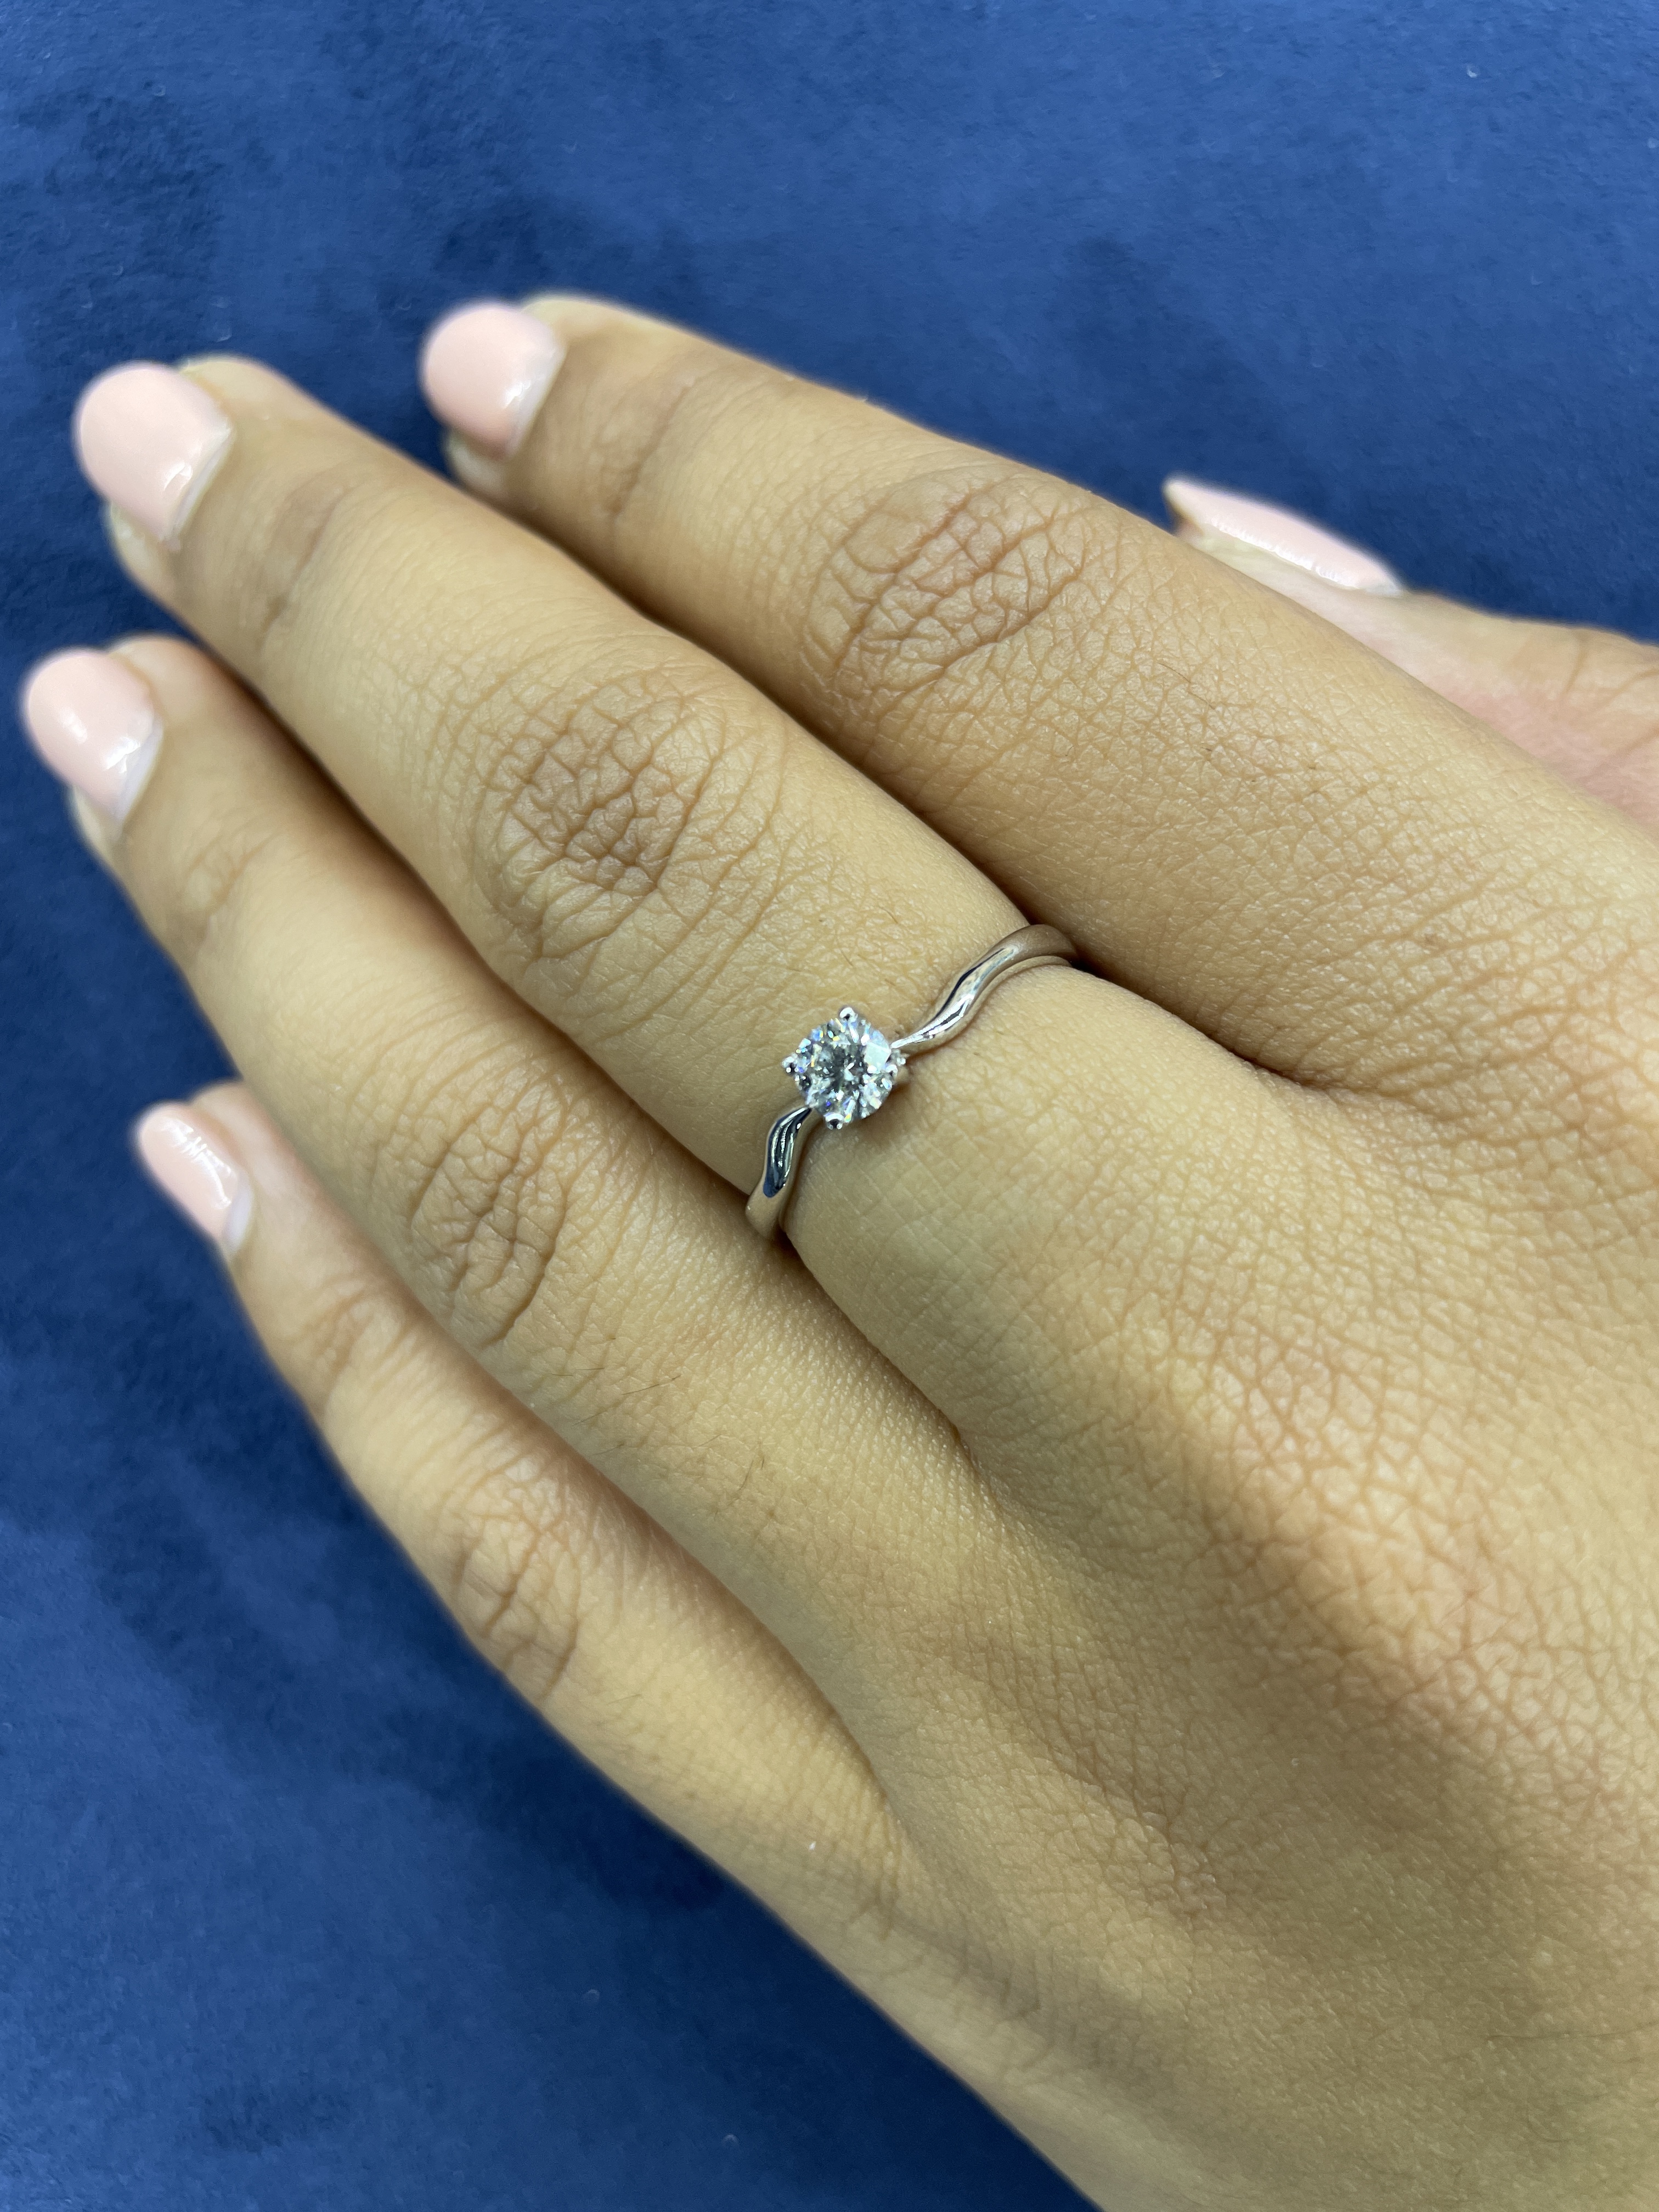 A SOLITAIRE DIAMOND RING - Image 4 of 4